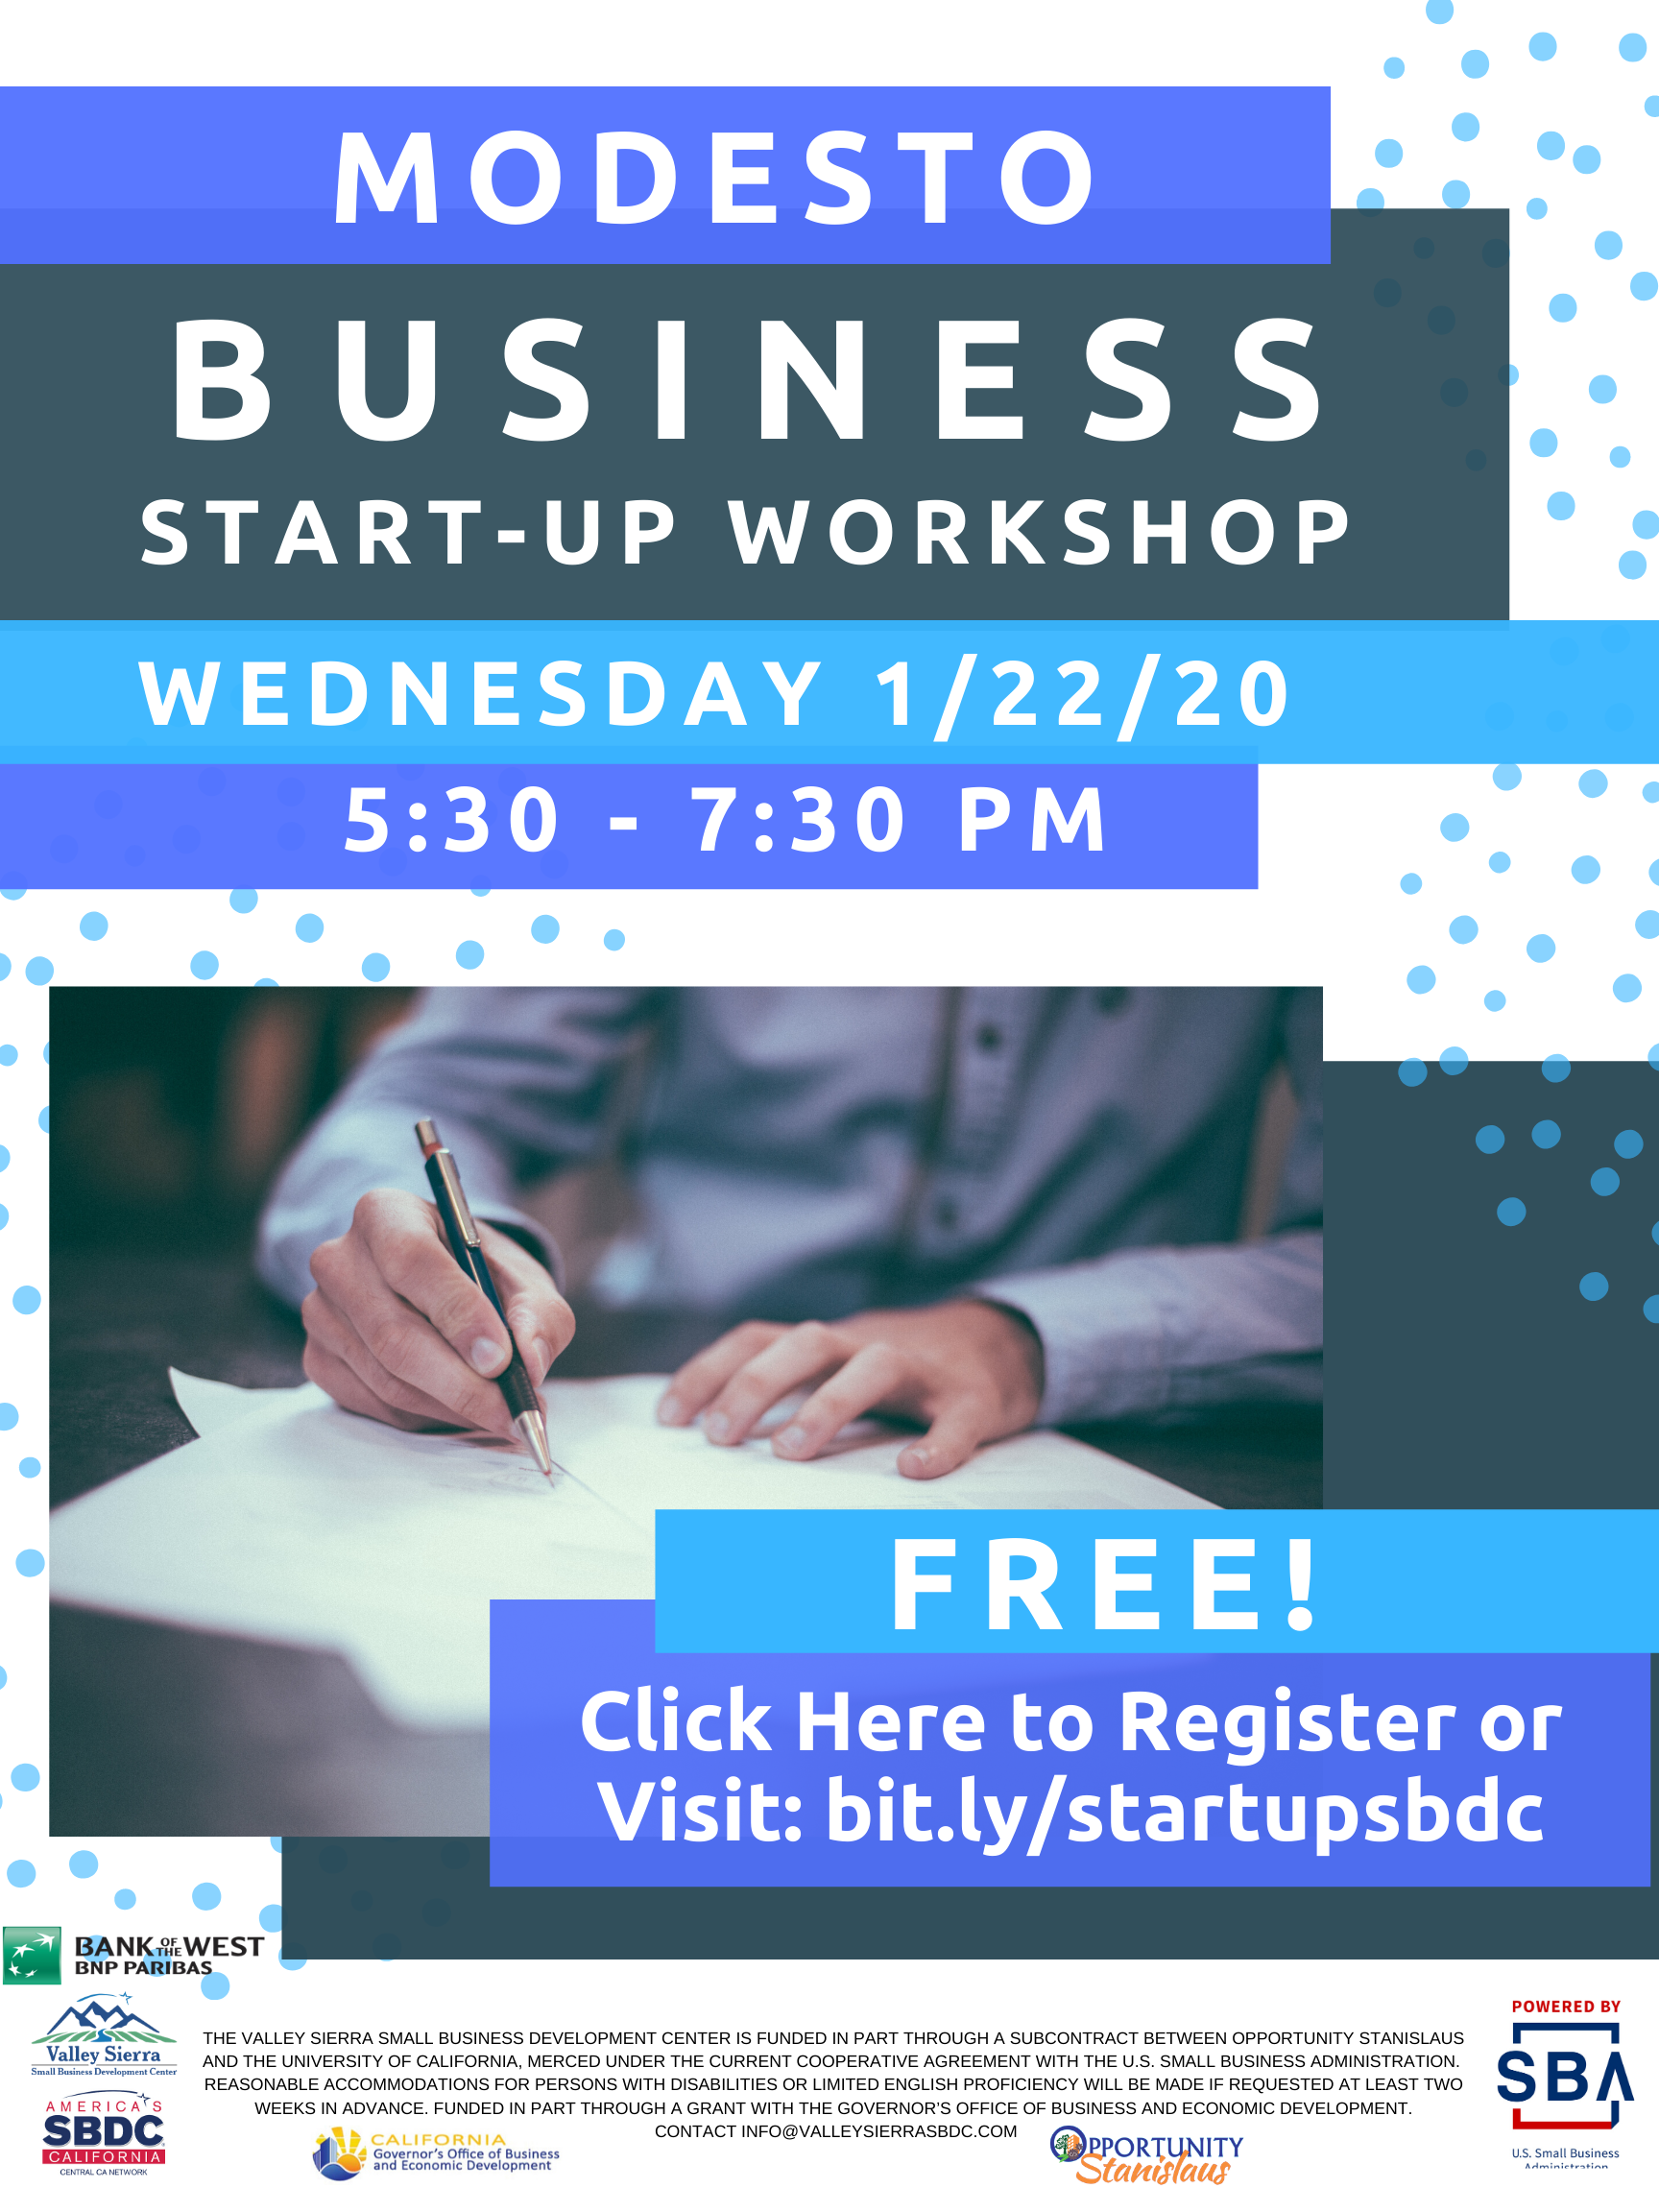 Event Flyer, Modesto Business Start Up, Wednesday 1/22/20 at the Valley Sierra SBDC. FREE.